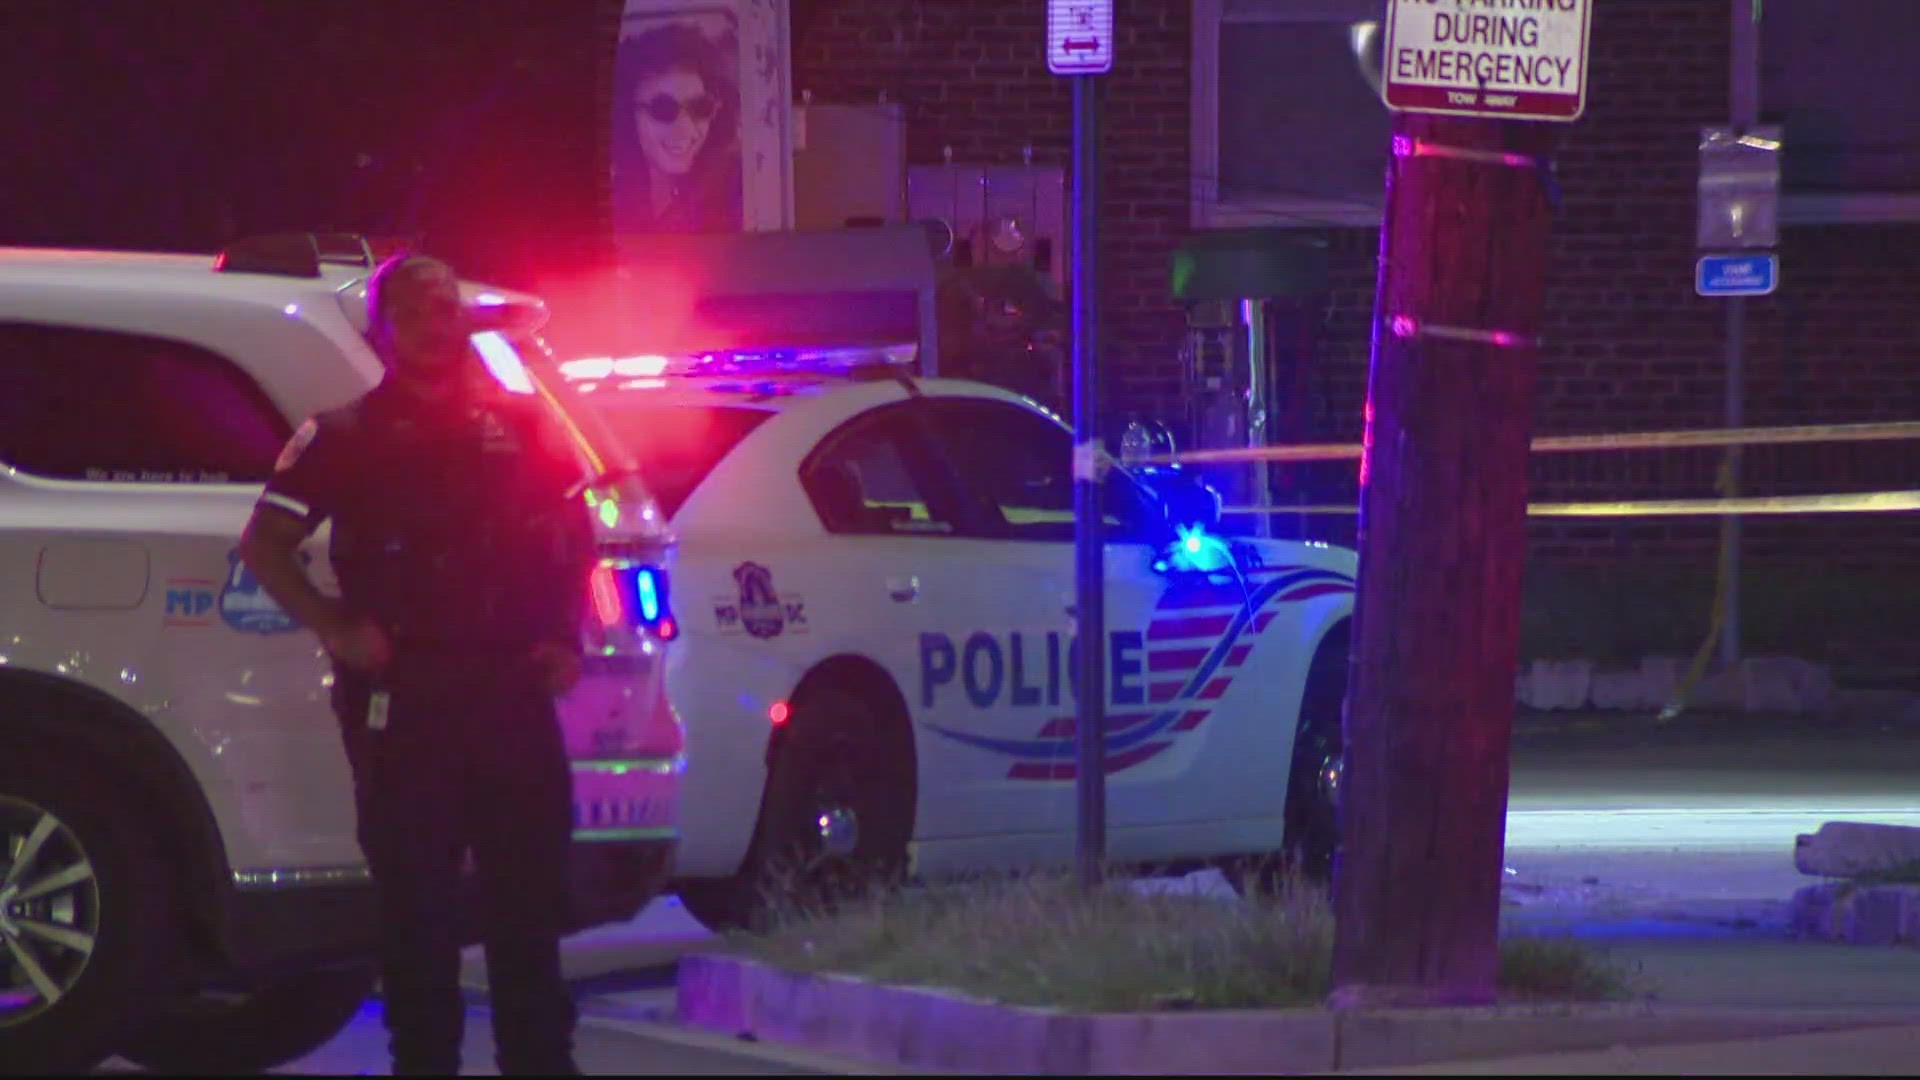 The shooting took place in the 1500 block of Kenilworth Avenue.